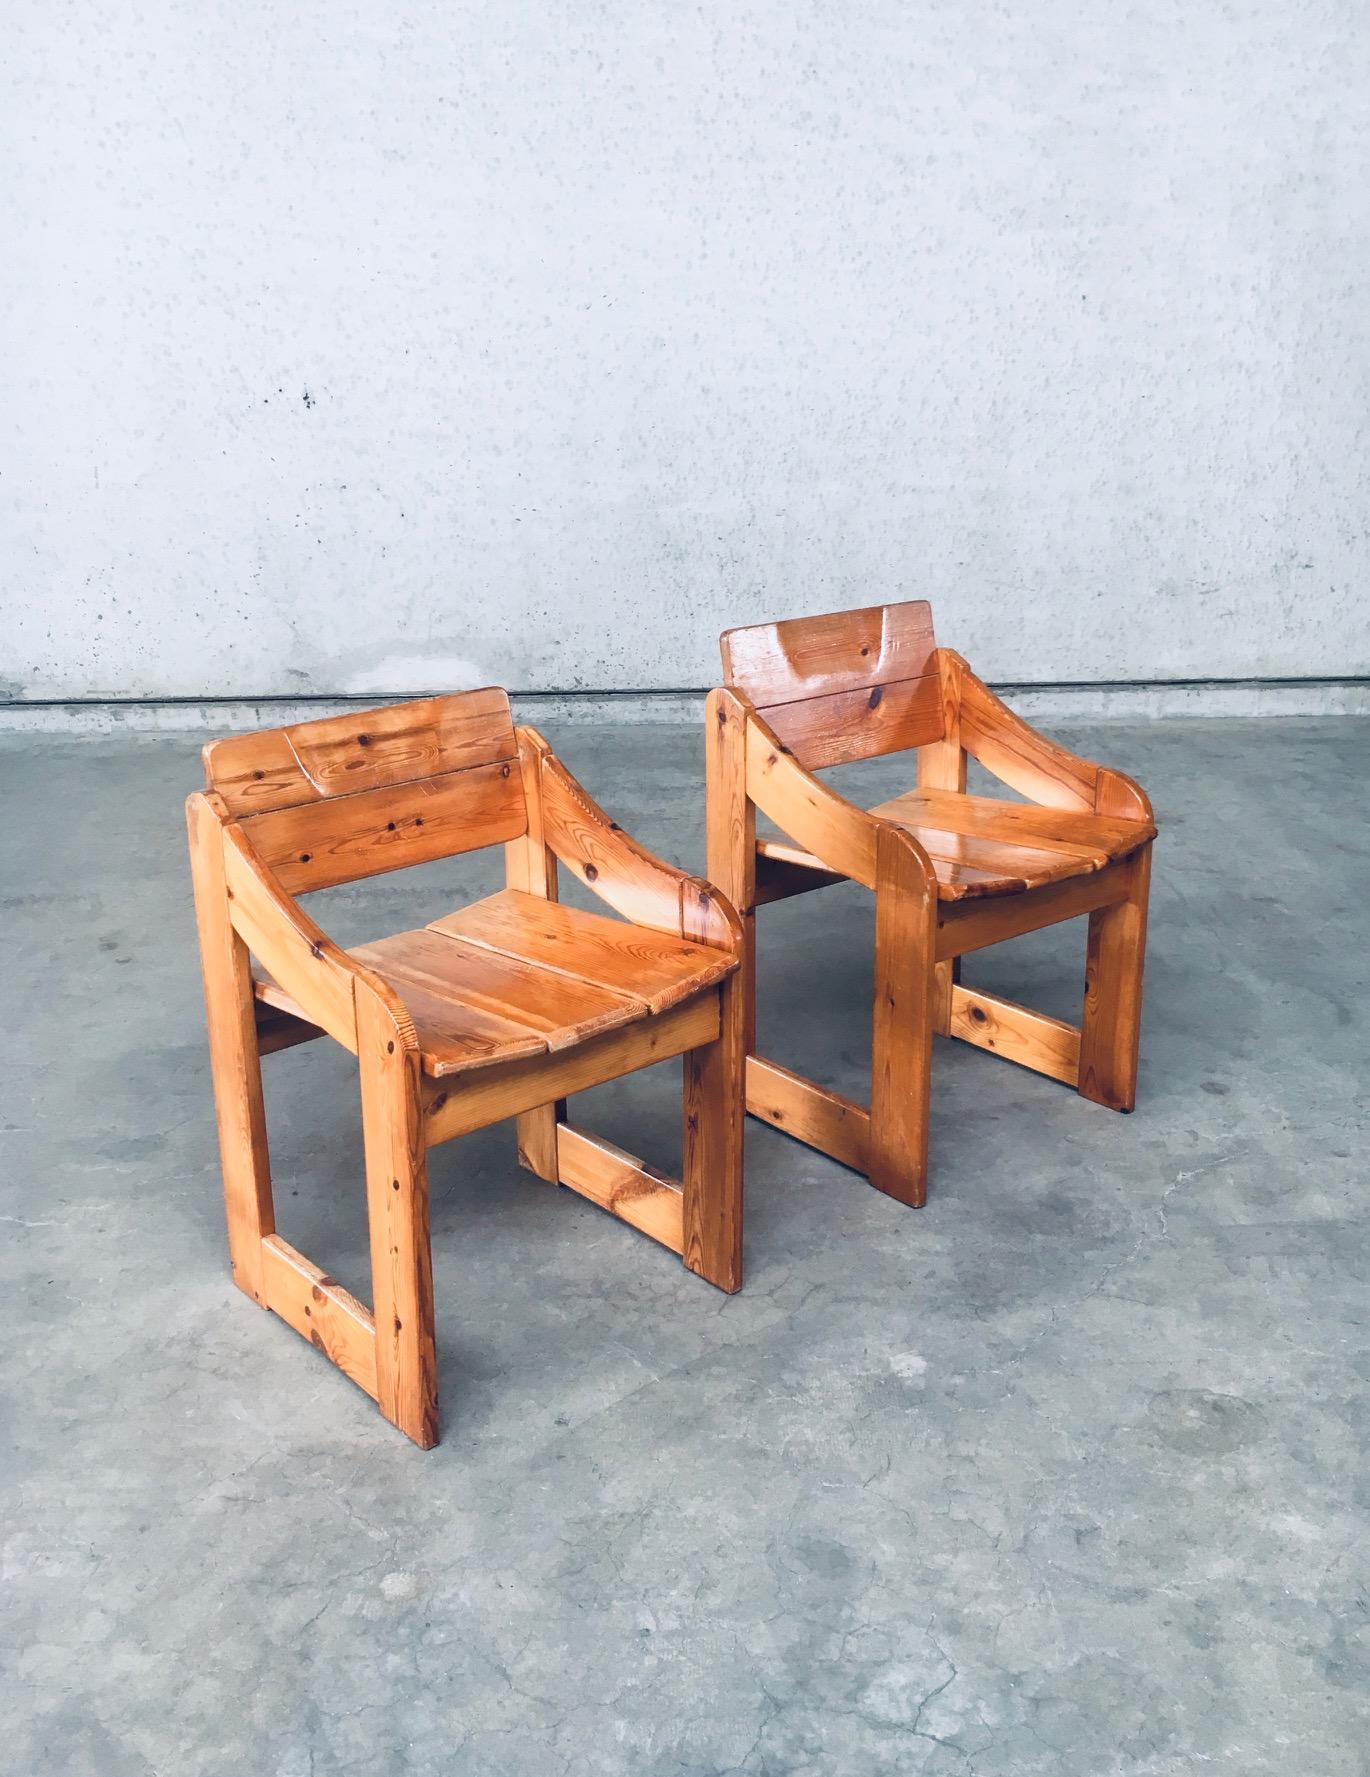 Vintage Midcentury Scandinavian Design Pine Side Chair set. Made in Sweden, 1960's period. In the manner of Rainer Daumiller designer. Solid pine wood constructed chairs. They both come in good, all original condition with normal signs of their use